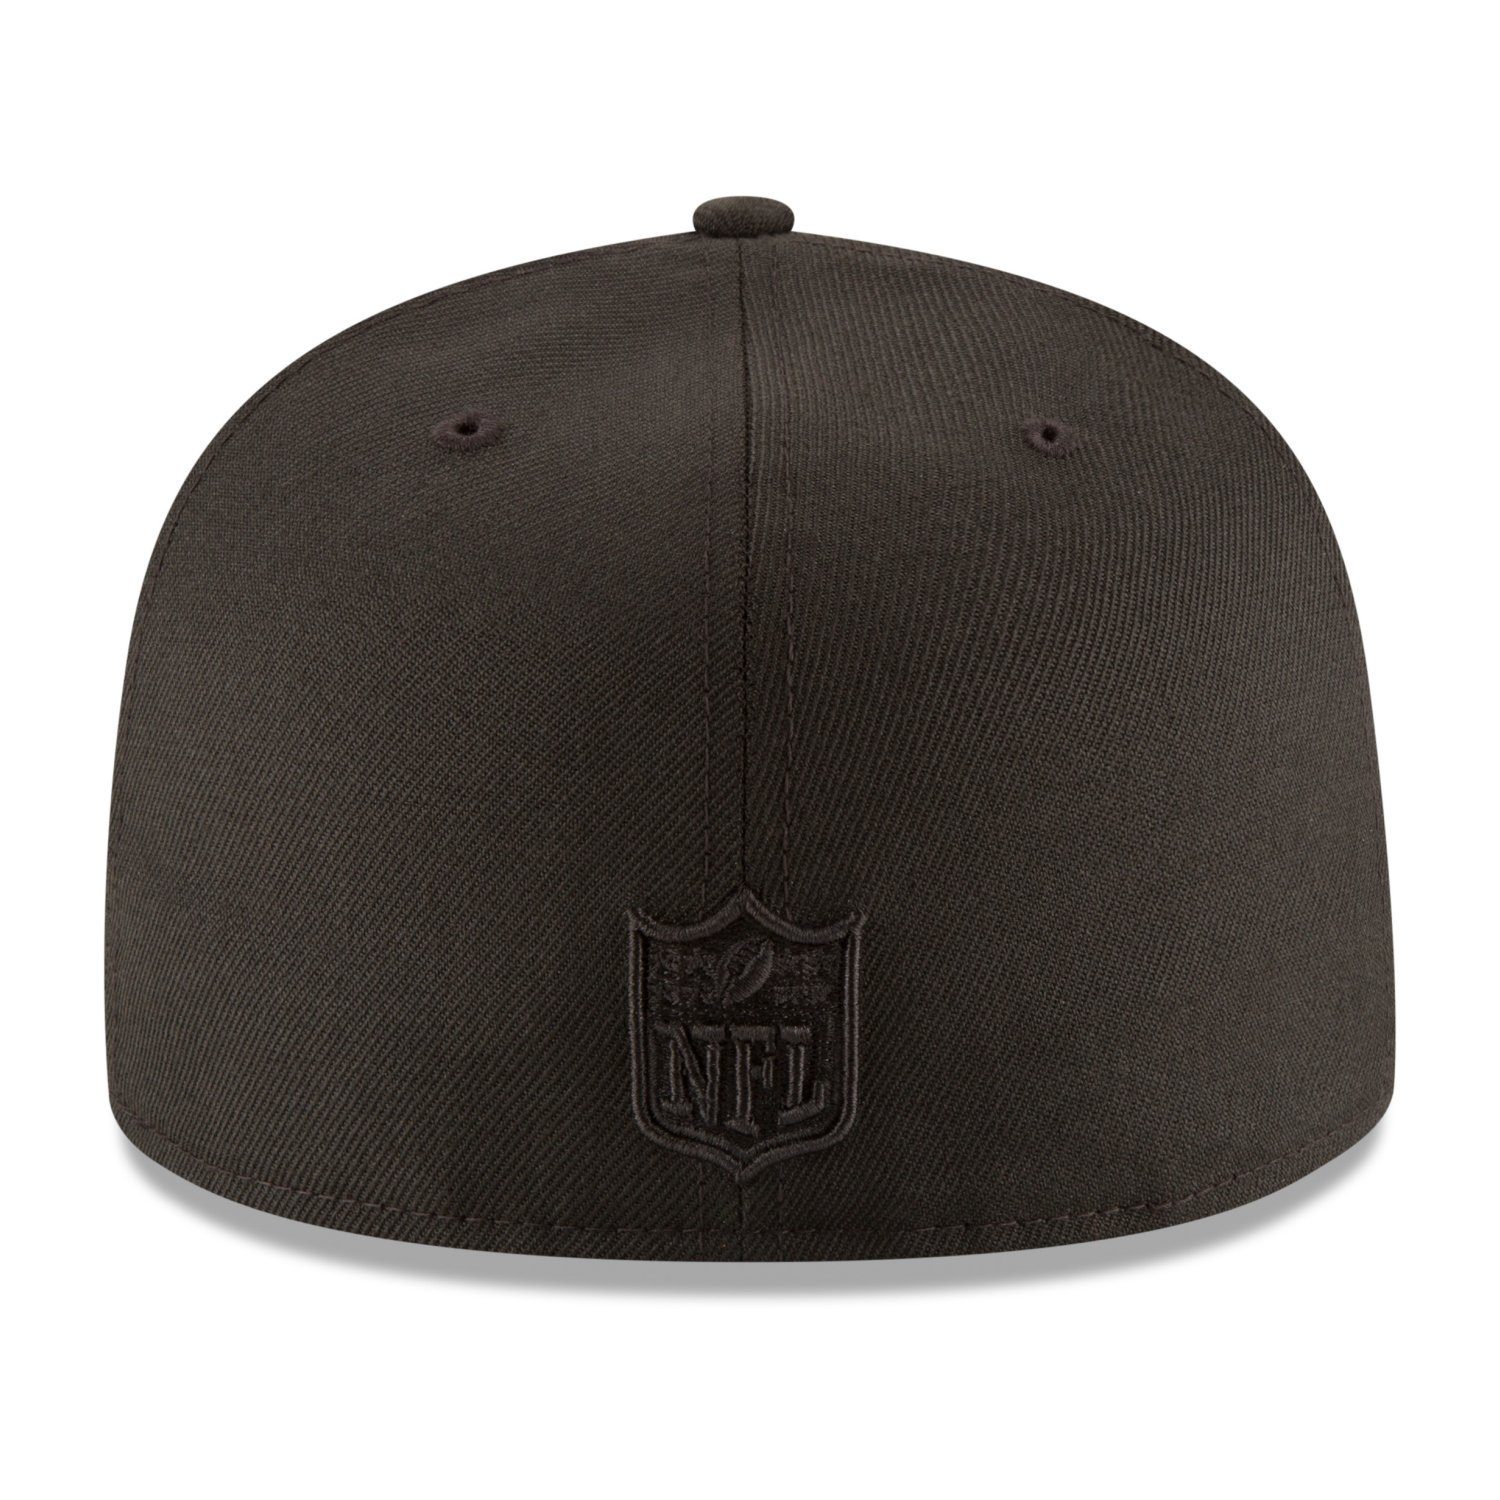 Jets Fitted NFL Era Cap New New York 59Fifty